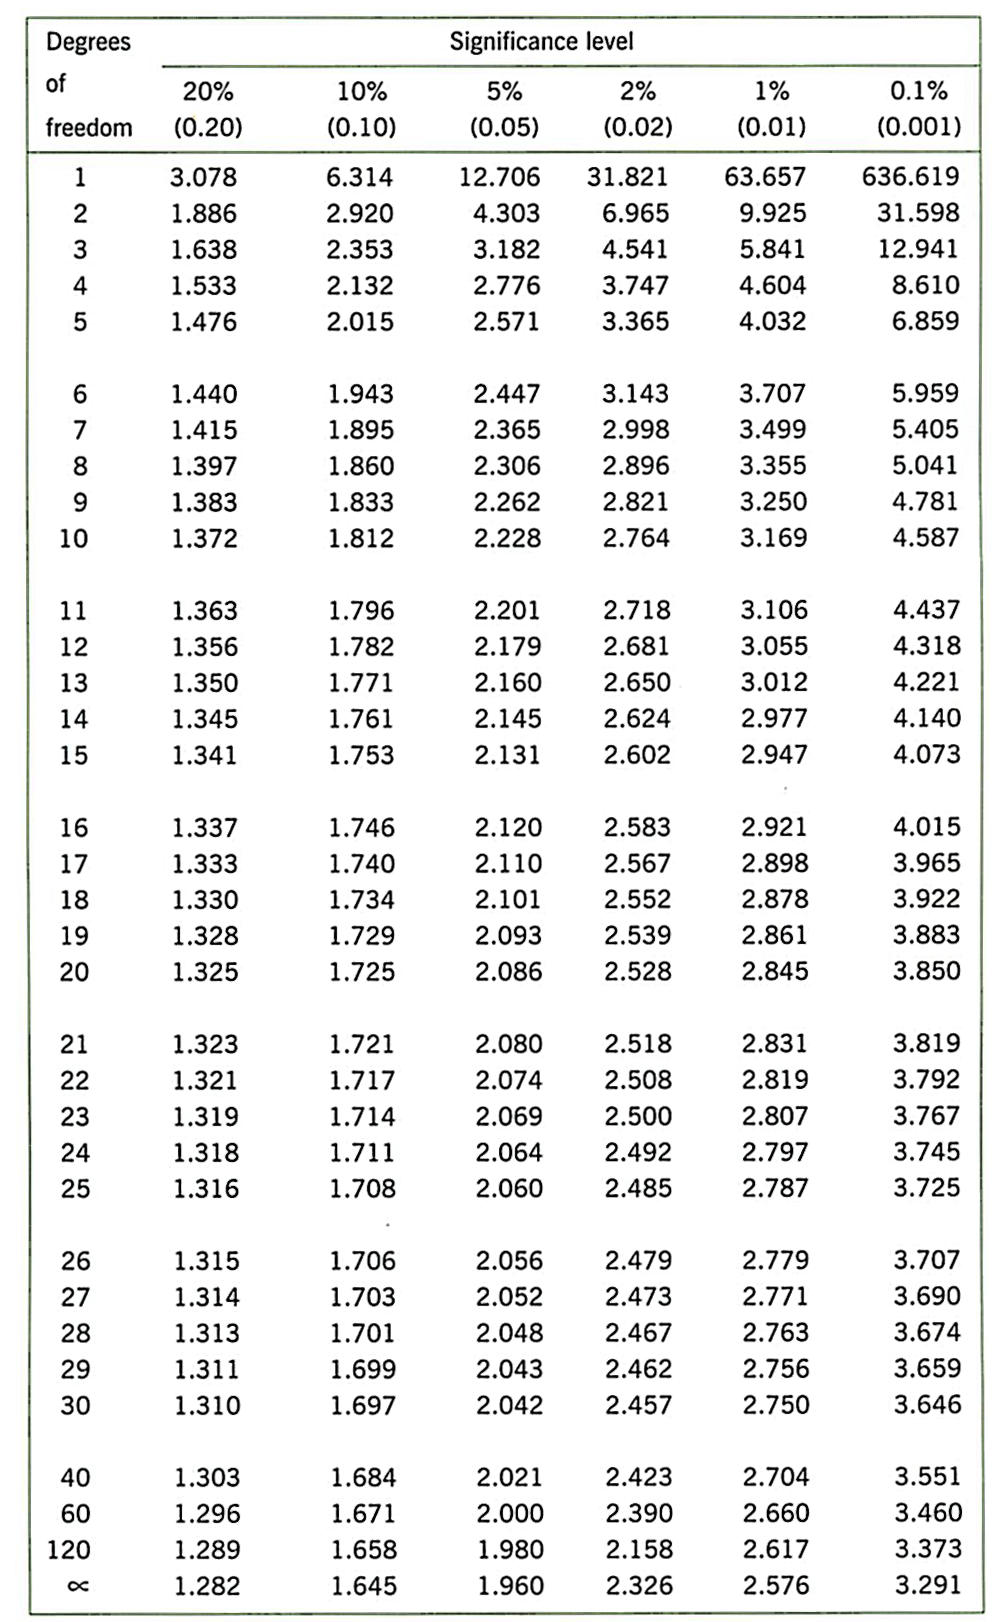 t-value table